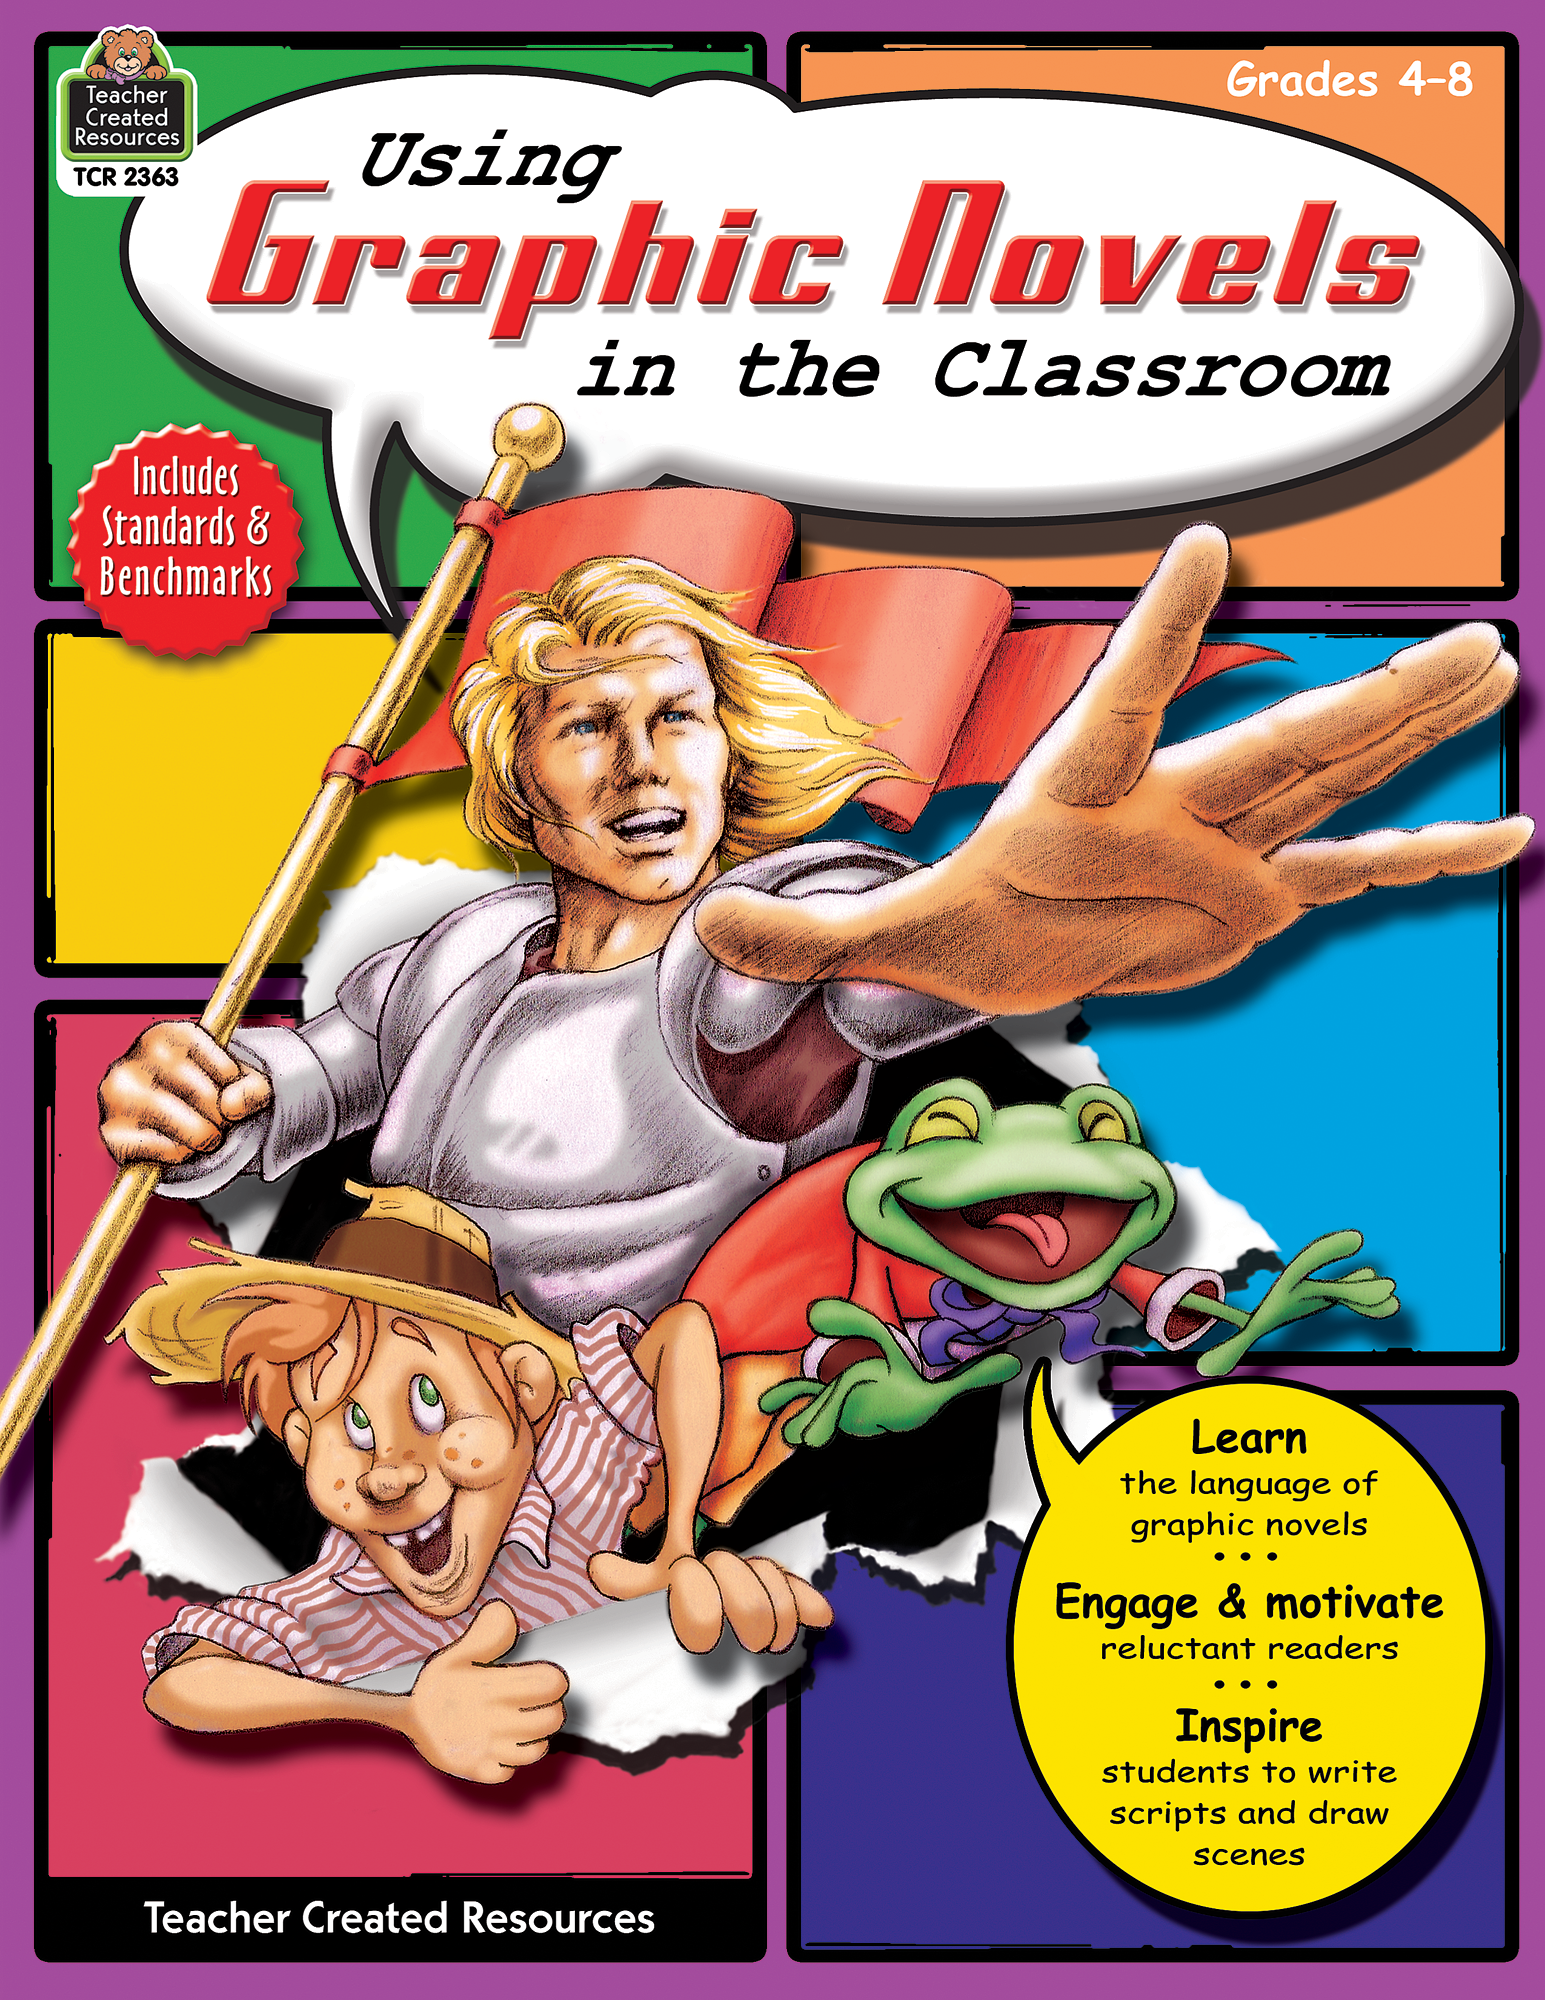 using-graphic-novels-in-the-classroom-grade-4-8-tcr2363-teacher